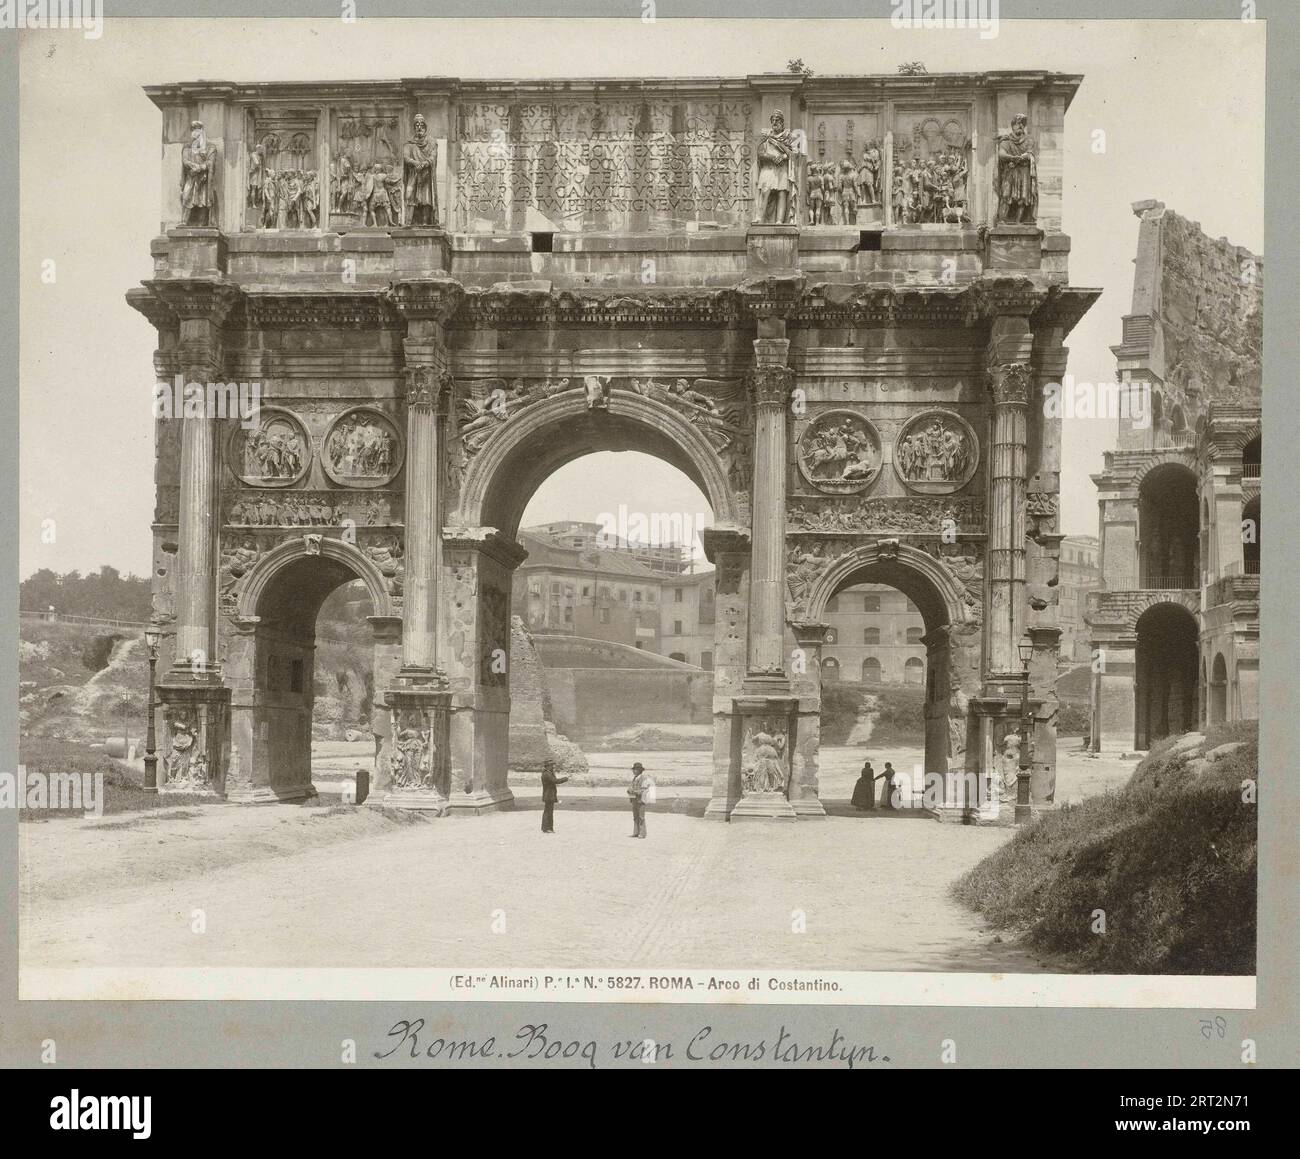 Rome, 1900, Archival Archive Photography, Rome Photo of 1900s, Constantine Arch Stock Photo